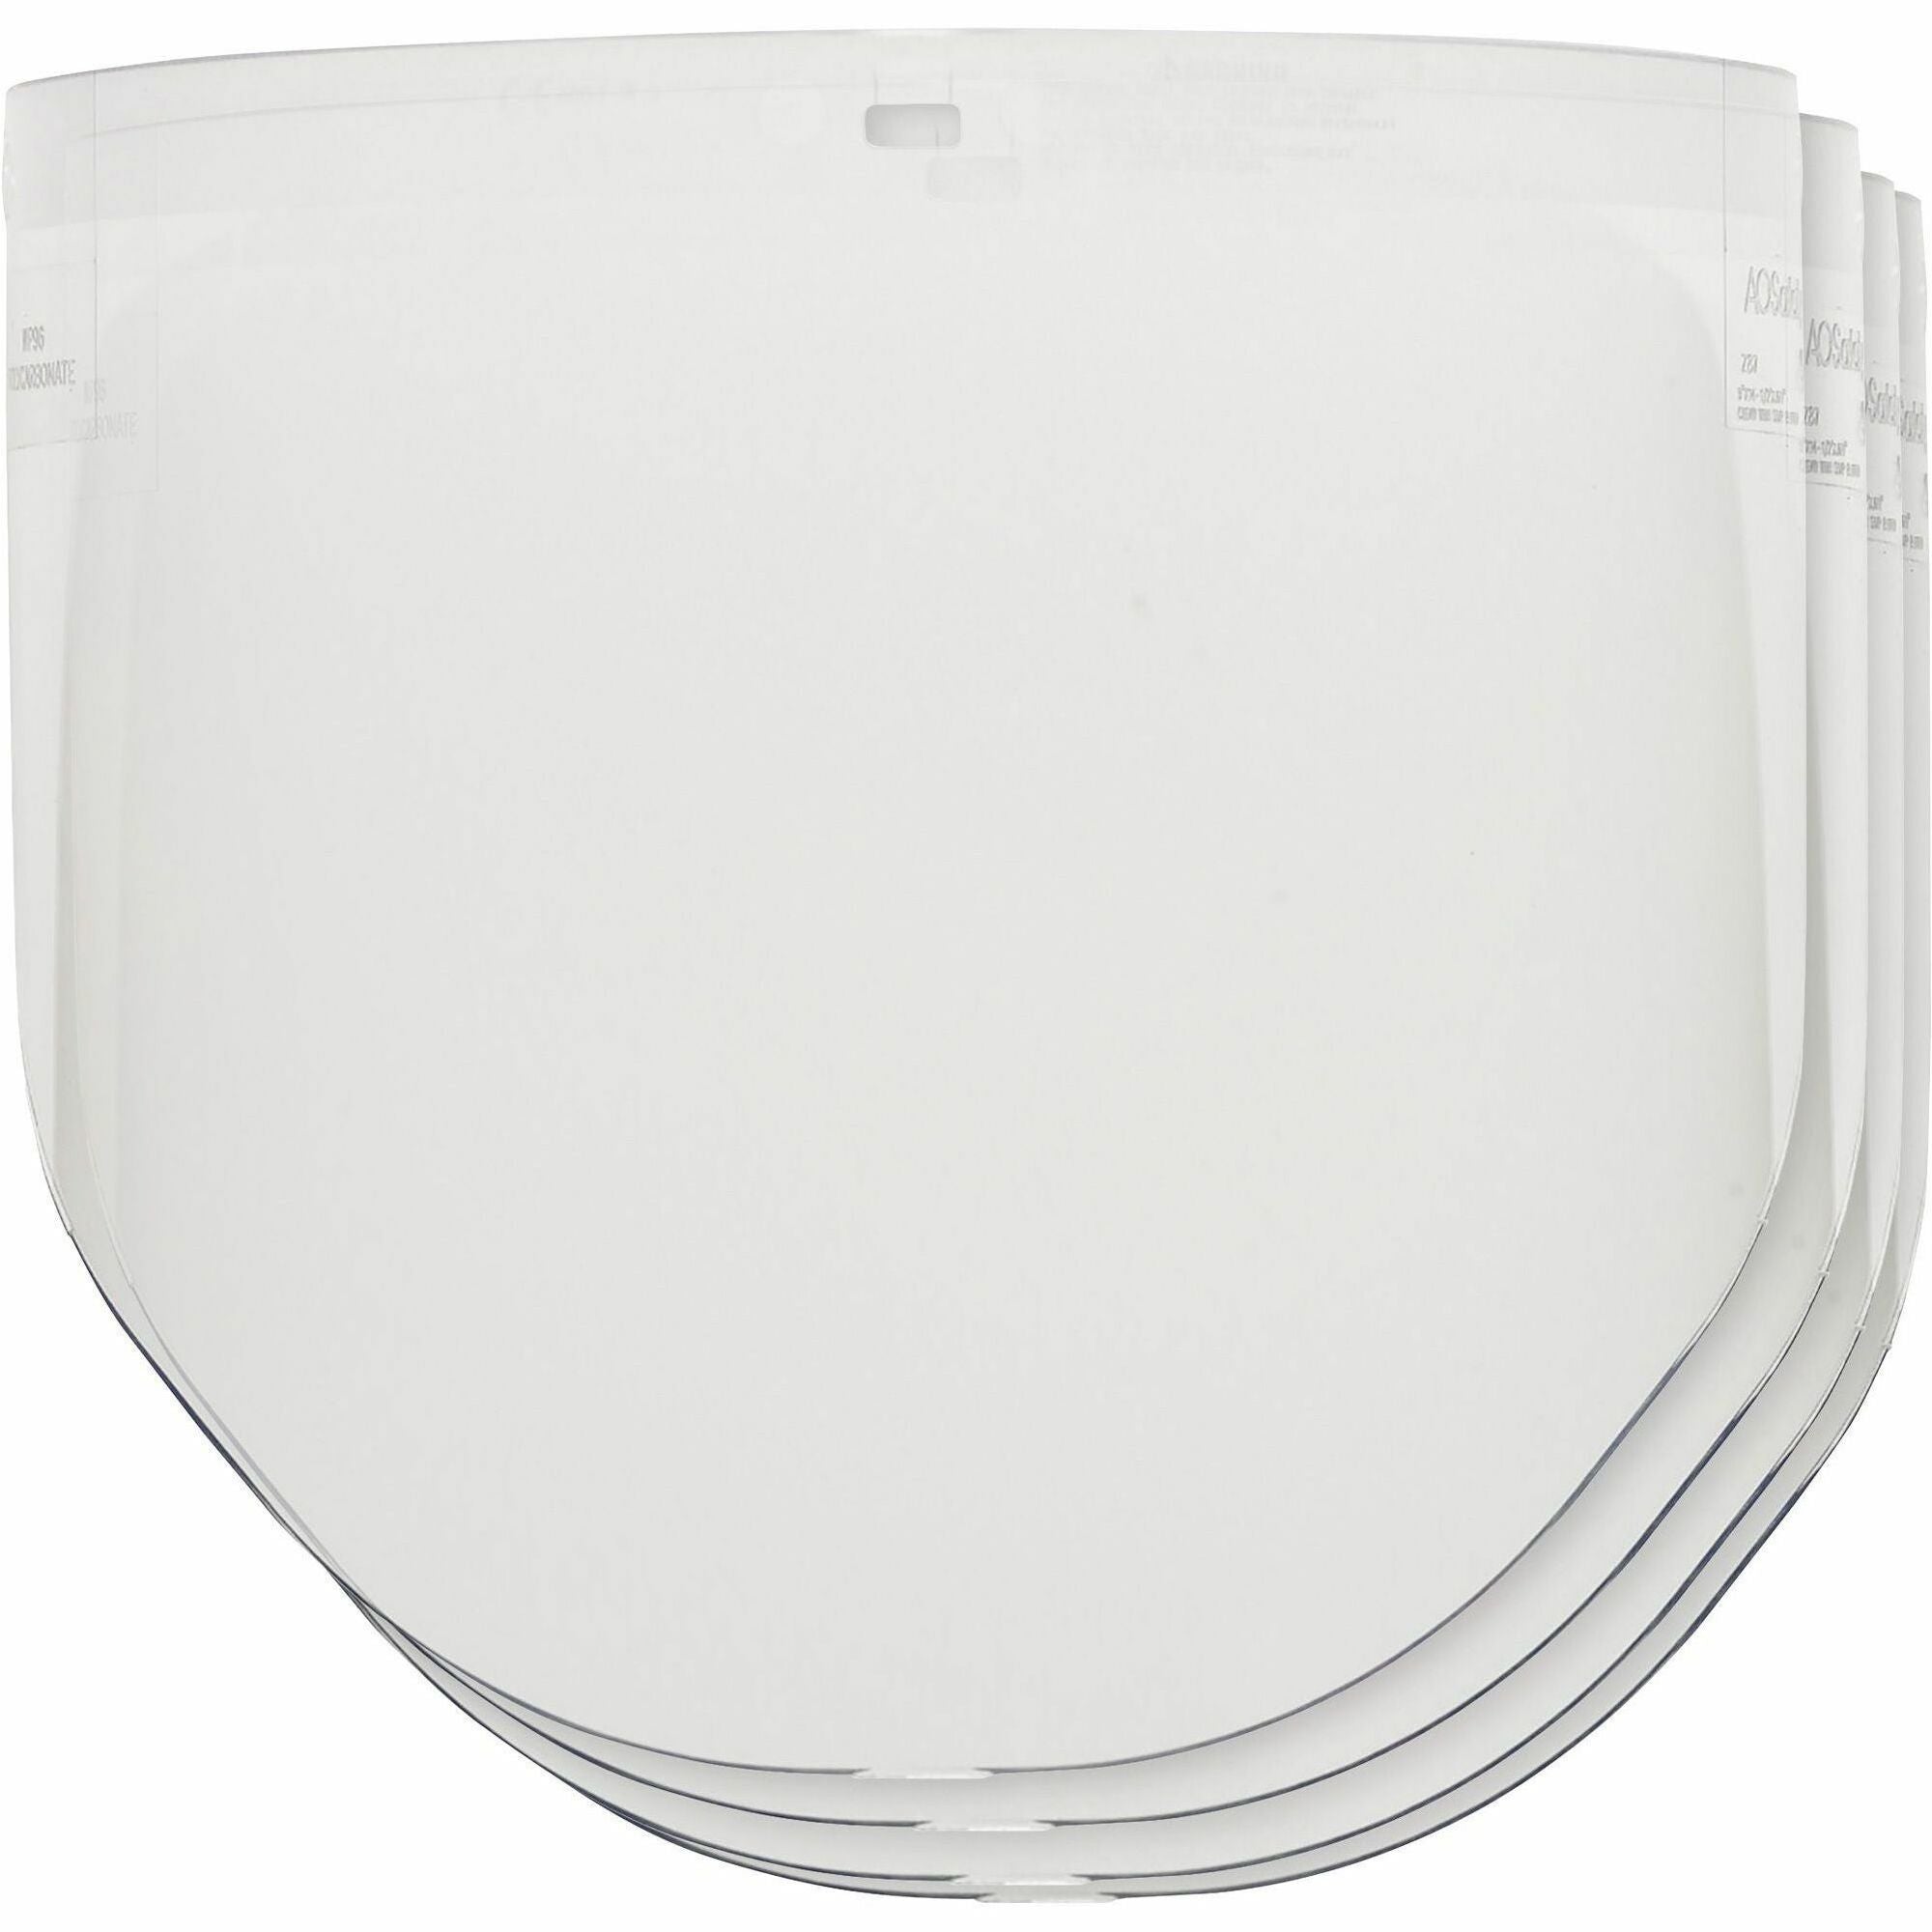 3m-w-series-face-shield-for-x5000-series-helmet_mmmwp96ct - 1